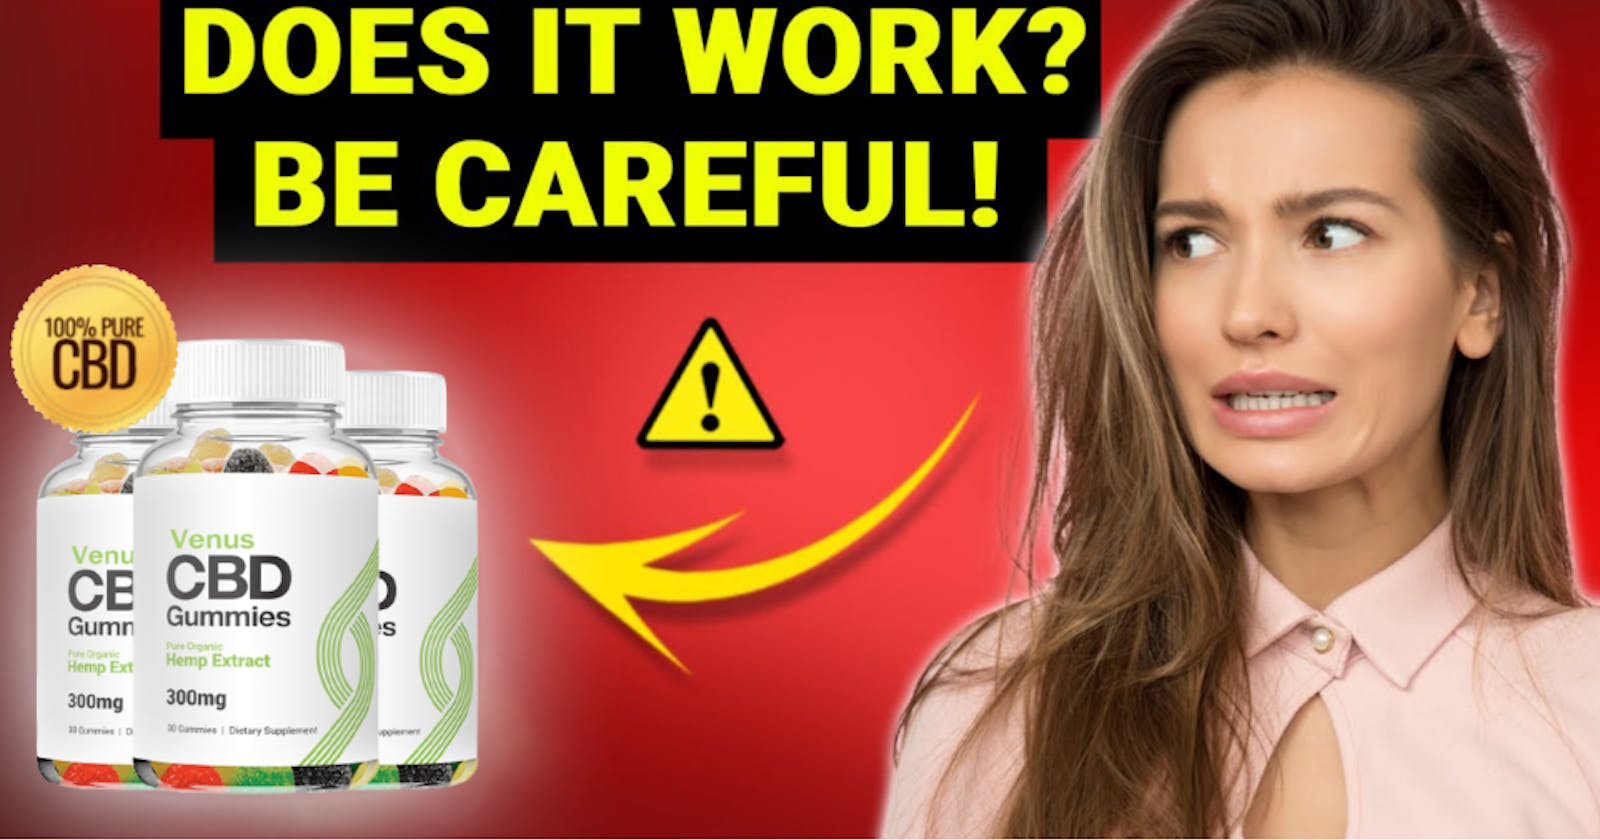 Venus CBD Gummies Reviews, Side Effects, Near Me, Amazon, Cost, Price, Reddit, Scam & Where To Buy?